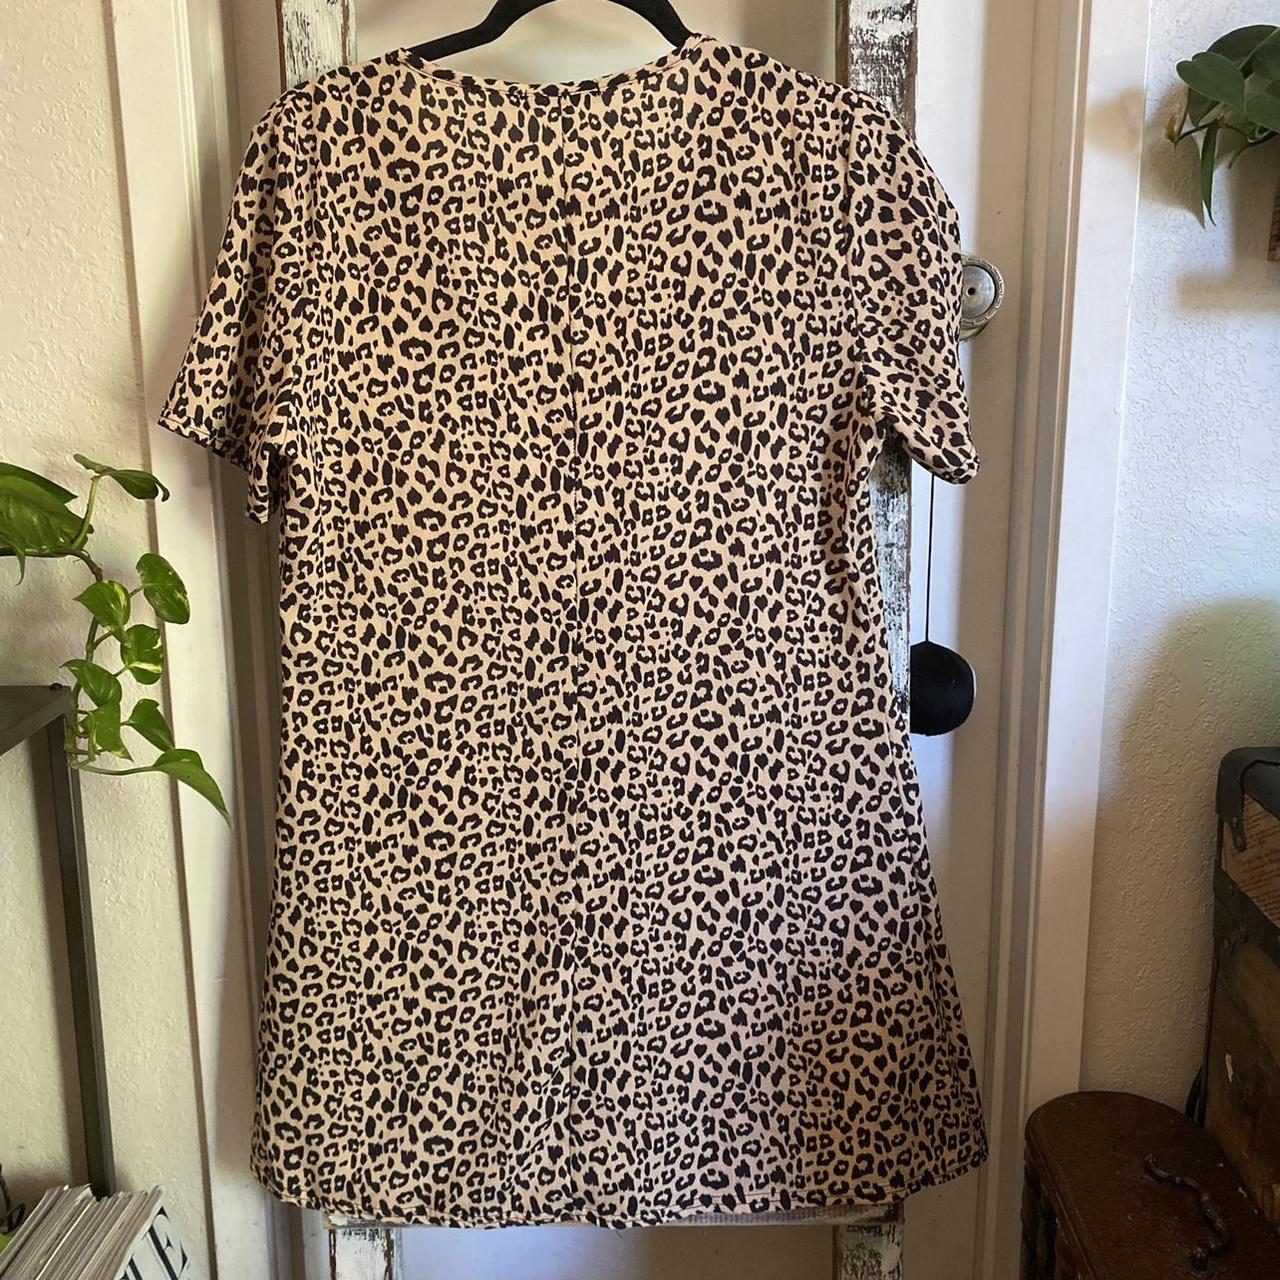 Product Image 3 - Boohoo leopard print button dress

very